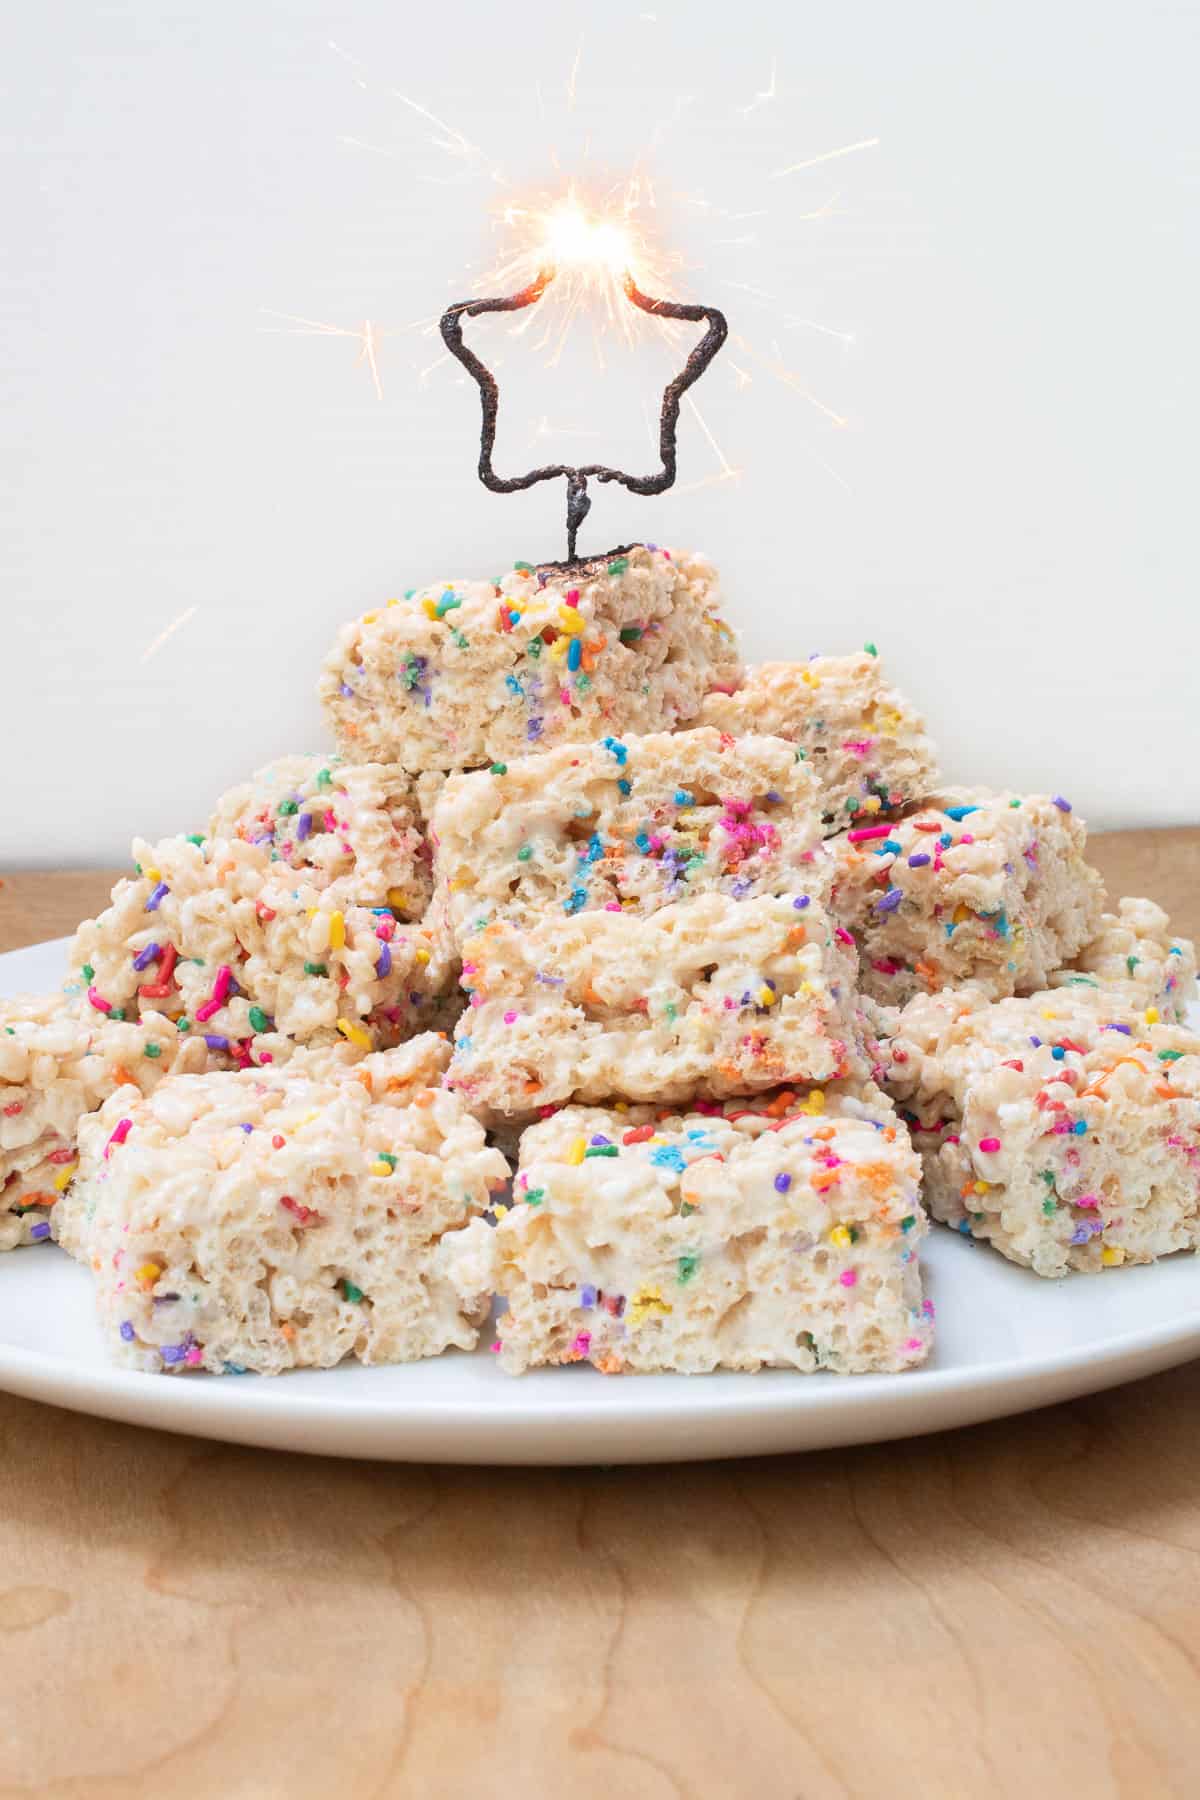 A star-shaped sparkler is throwing sparks atop a pile of treats on a white plate.